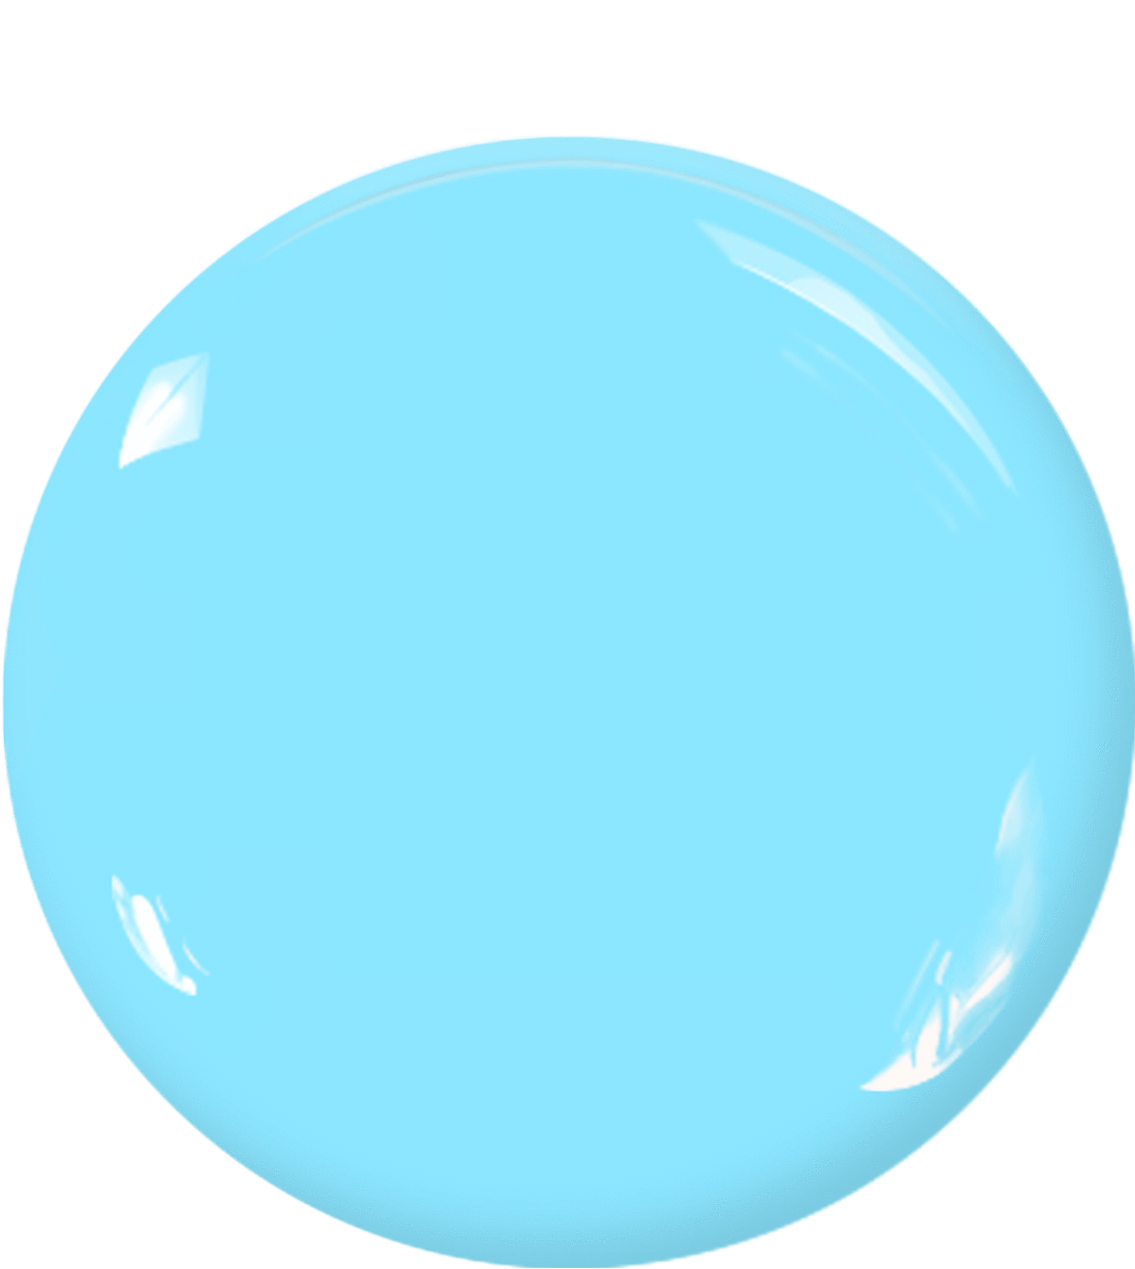 Glossy Blue Sphere Graphic PNG